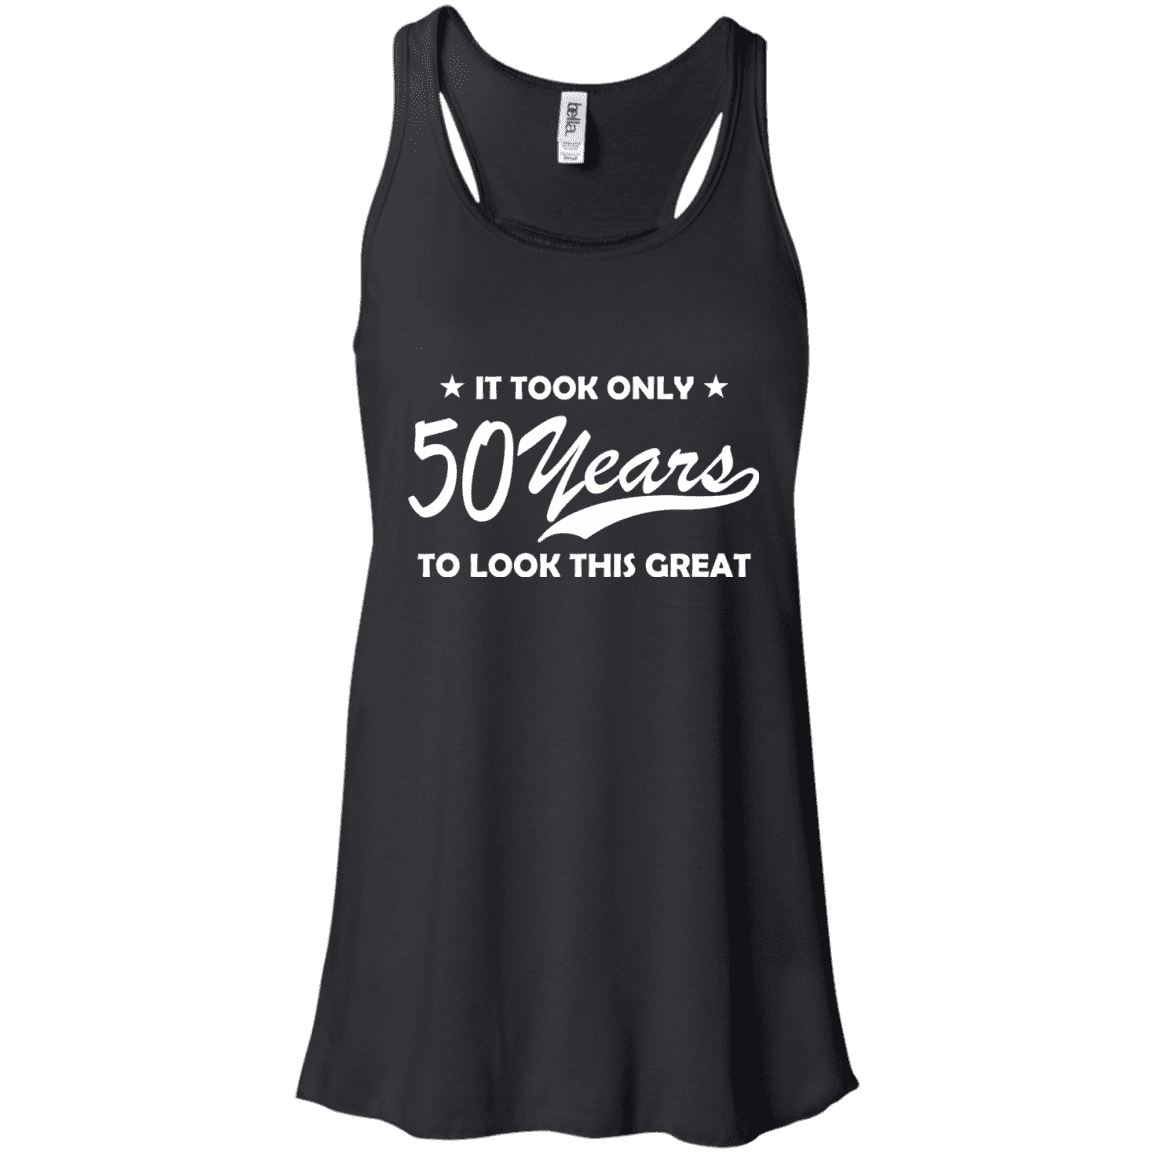 It Took Only 50 Years Ladies Tee - STUDIO 11 COUTURE